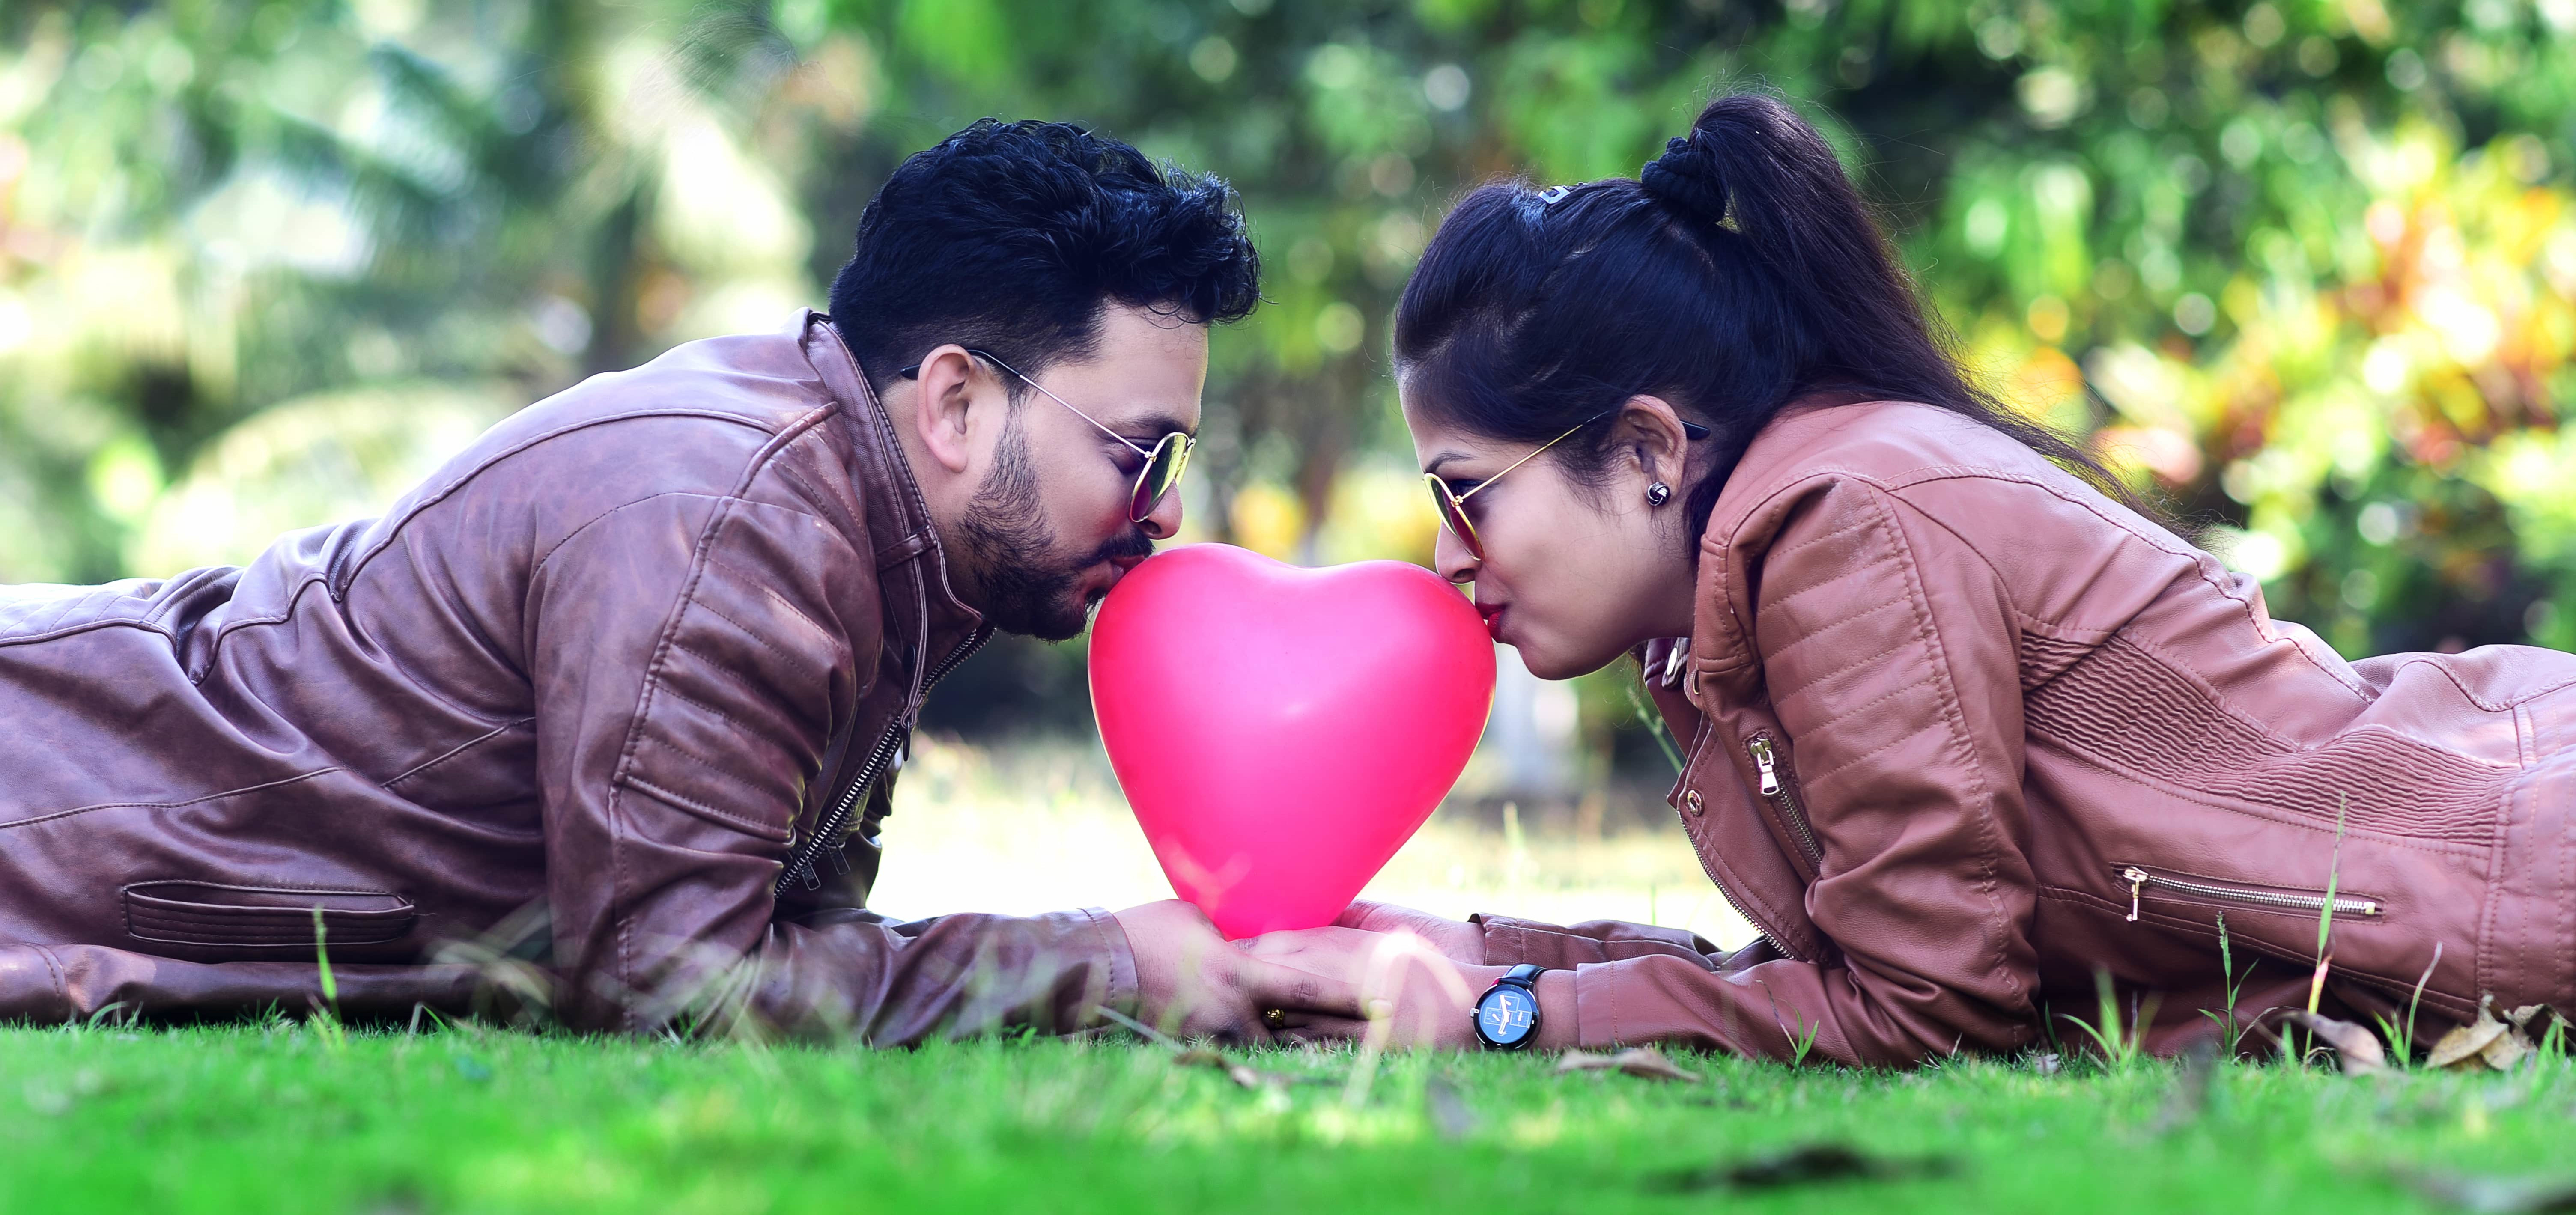 Couple with a heart balloon lying on grass